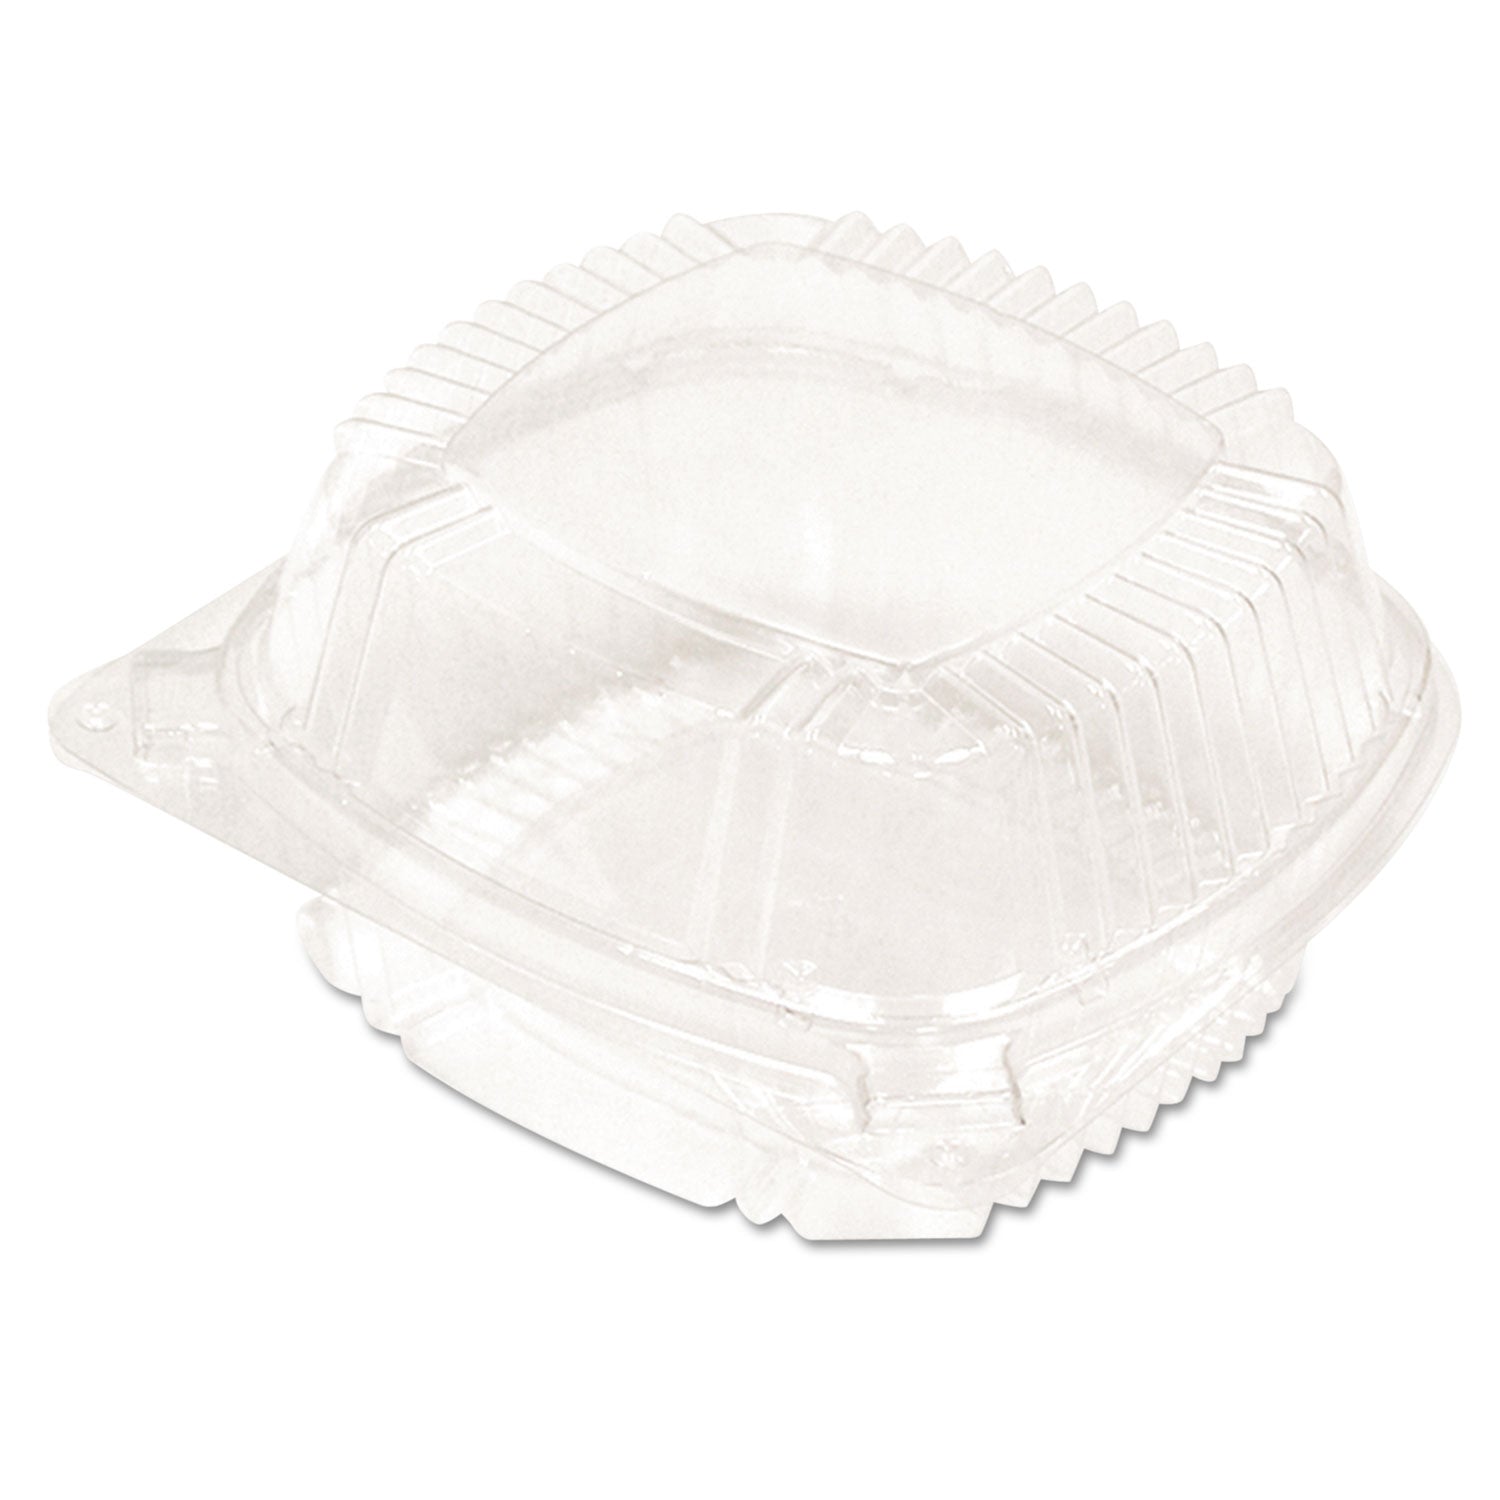 clearview-smartlock-hinged-lid-container-hoagie-container-11-oz-525-x-525-x-25-clear-plastic-375-carton_pctyci81050 - 1